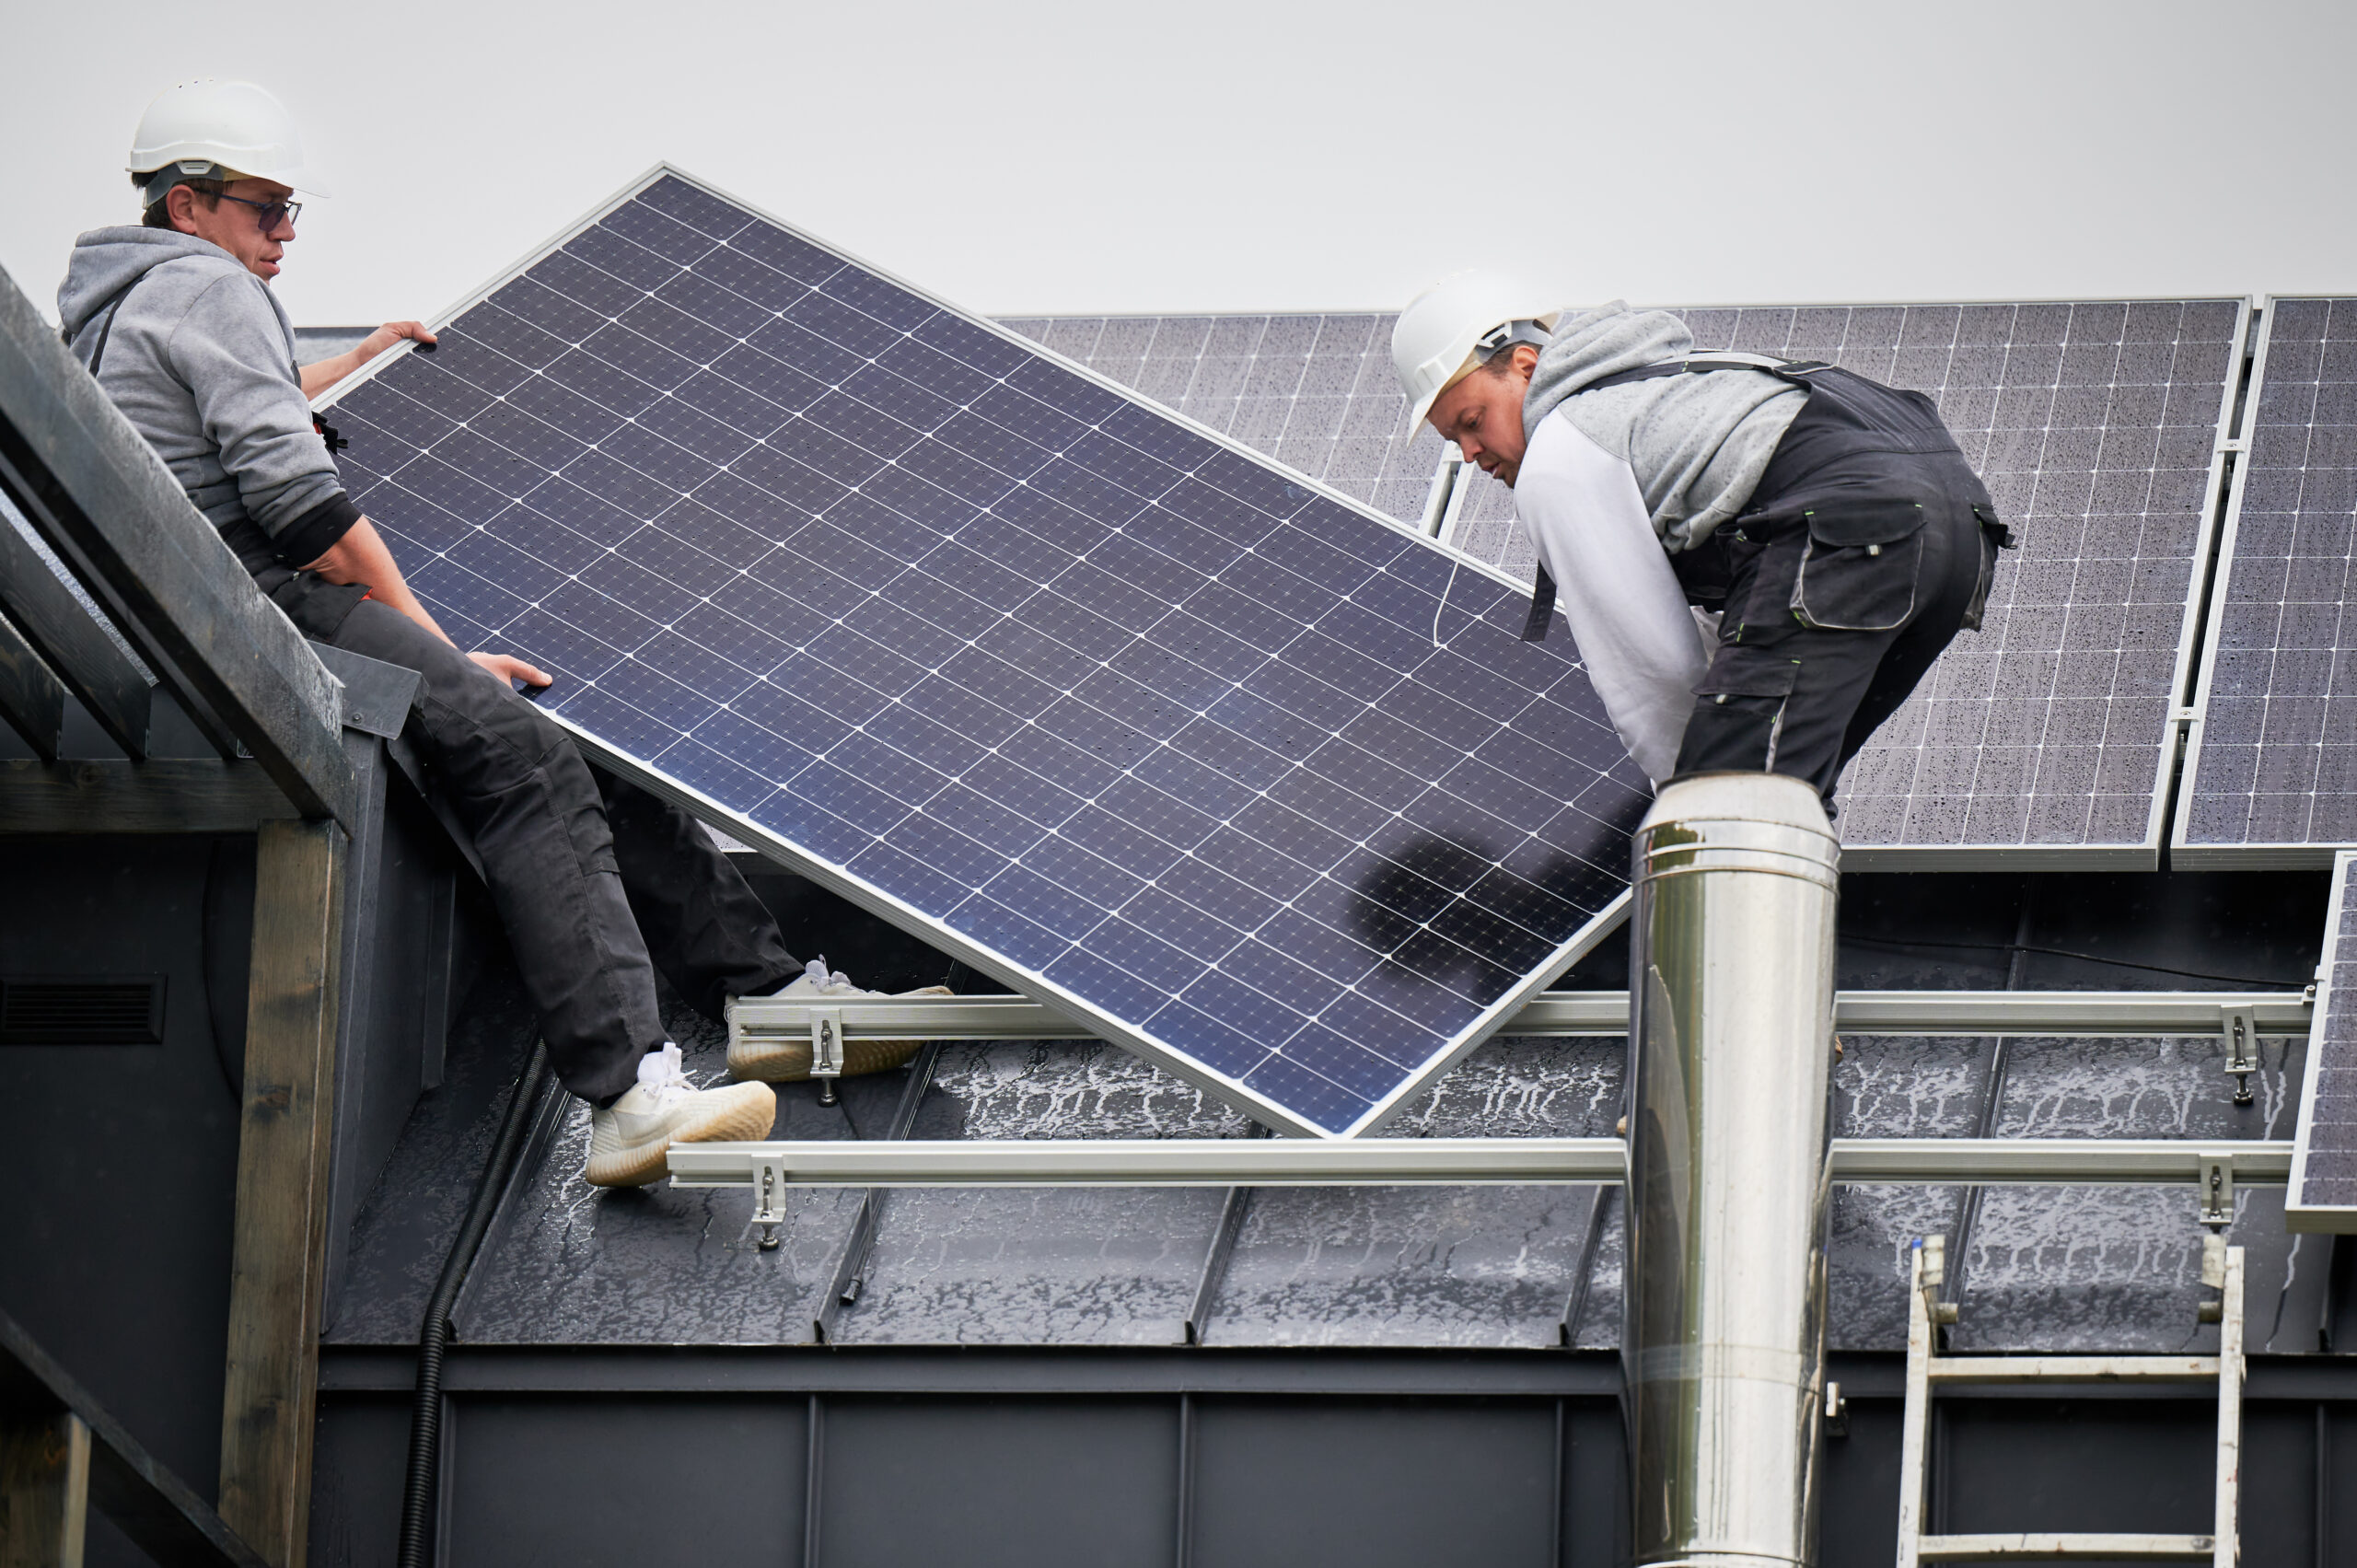 technicians carrying photovoltaic solar module while installing solar panel system on roof of house